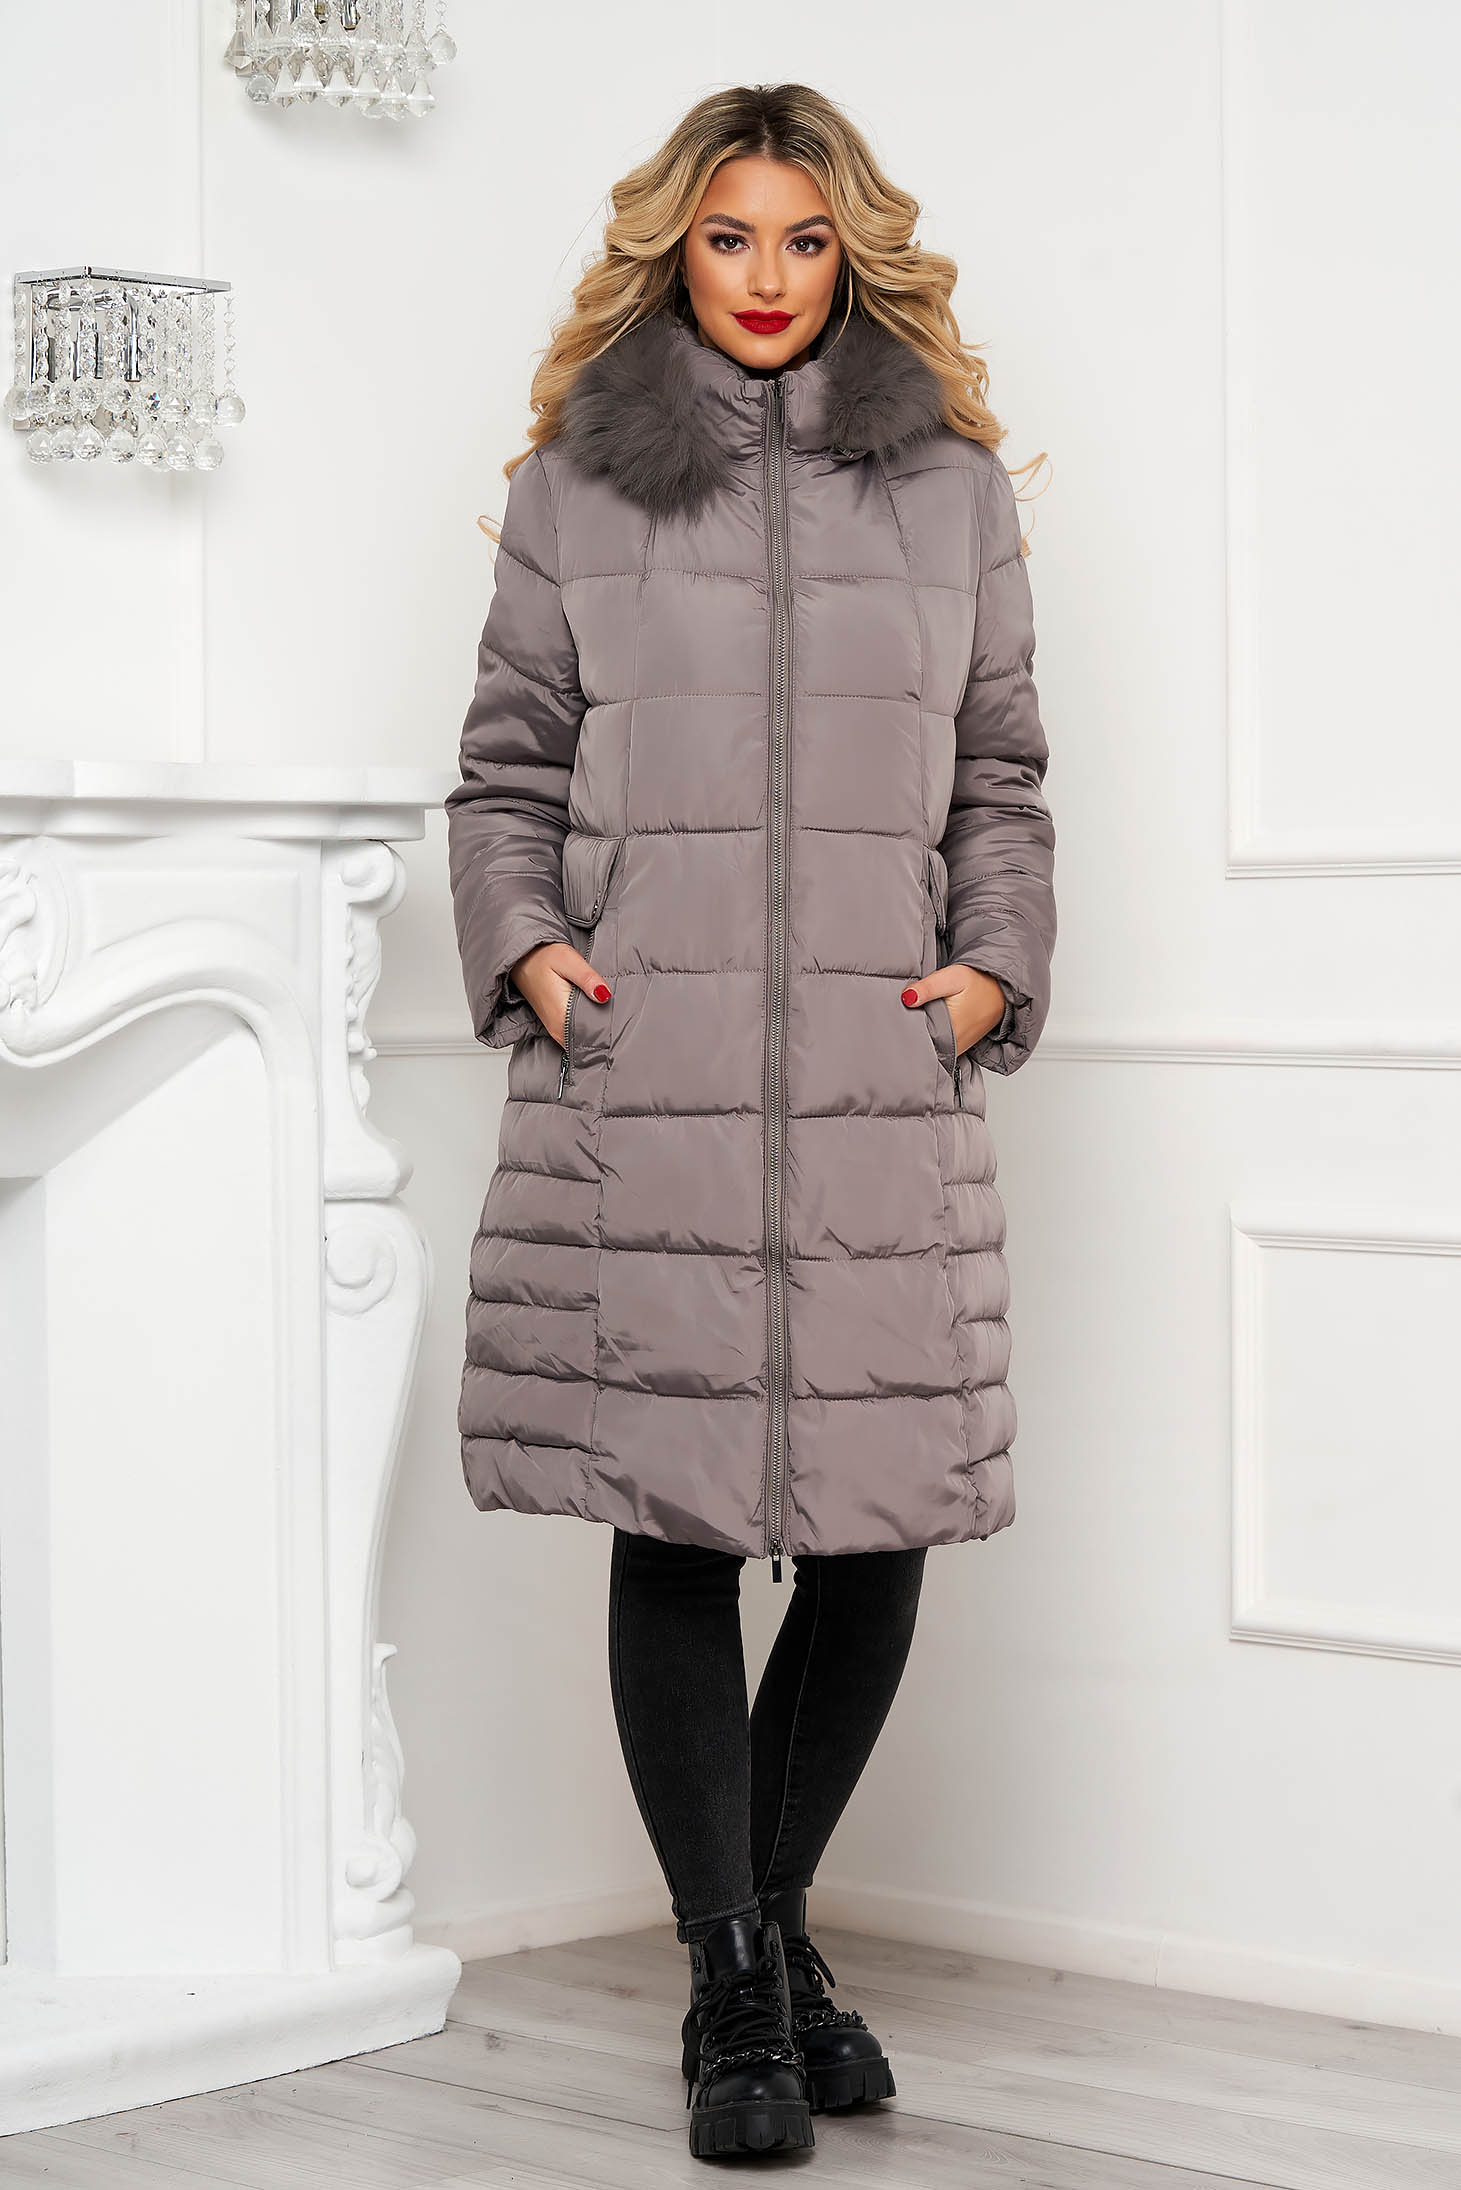 Grey jacket loose fit from slicker detachable hood with faux fur accessory